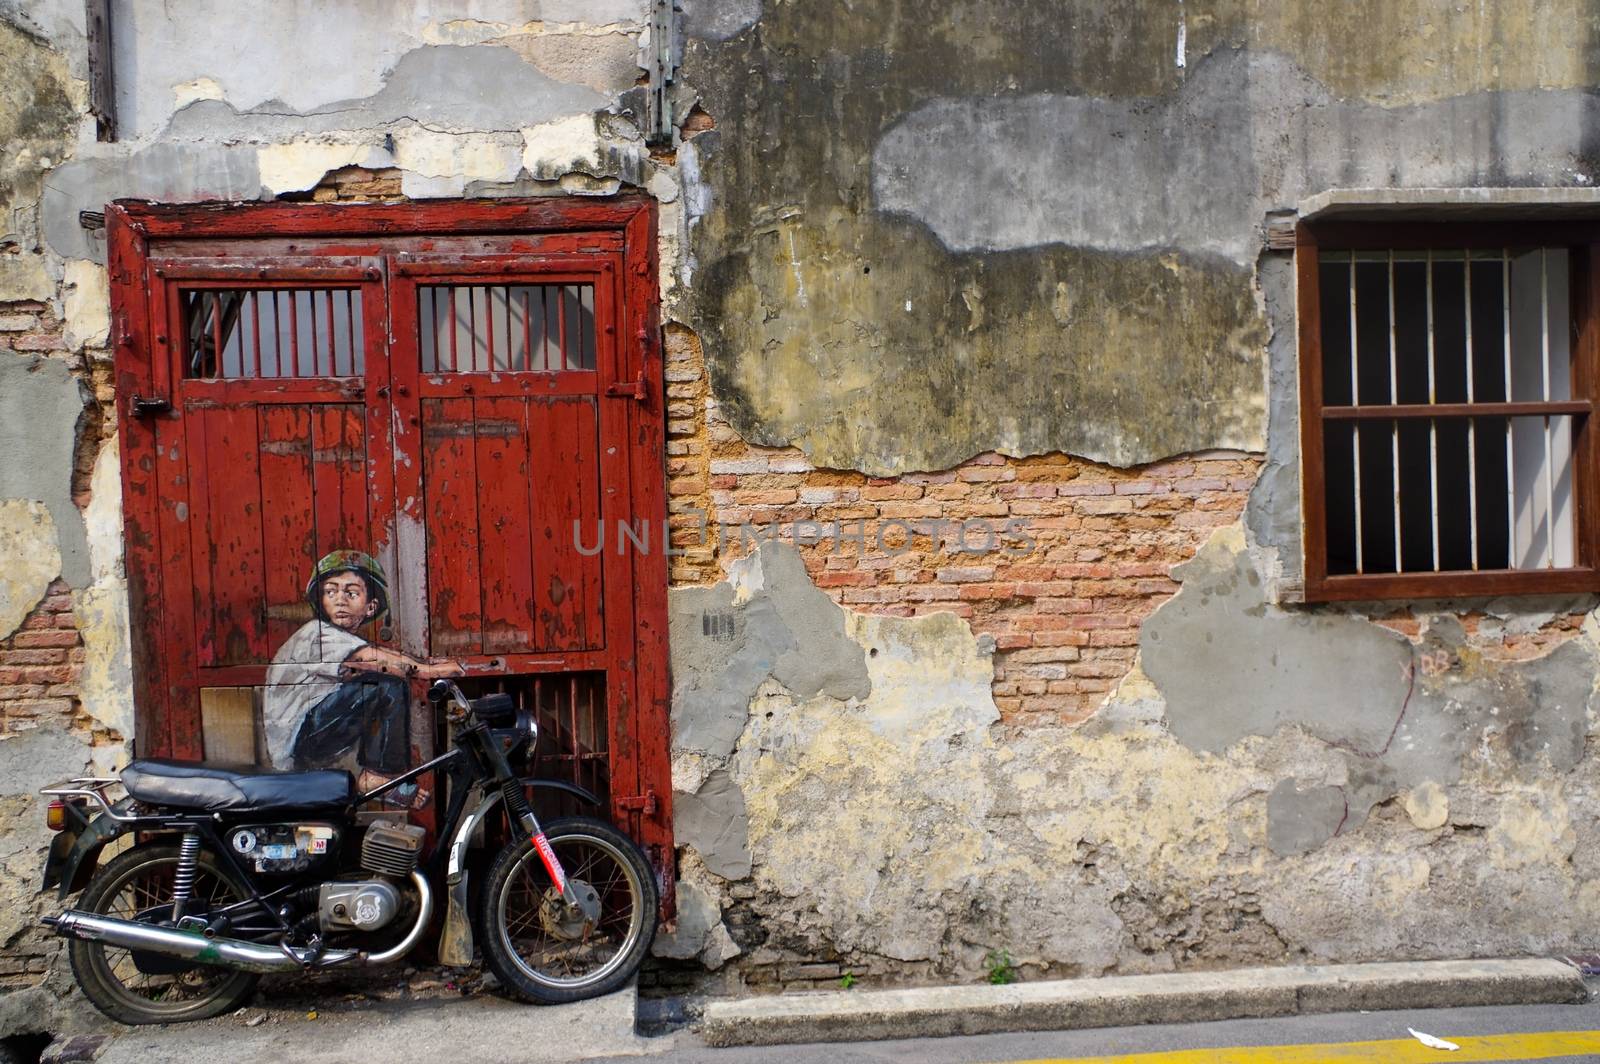 PENANG, MALAYSIA - April 18, 2016: General view of a mural 'Boy on a Bike' painted by Ernest Zacharevic. The mural is one of the 9 murals paintings in early 2012. by evolutionnow